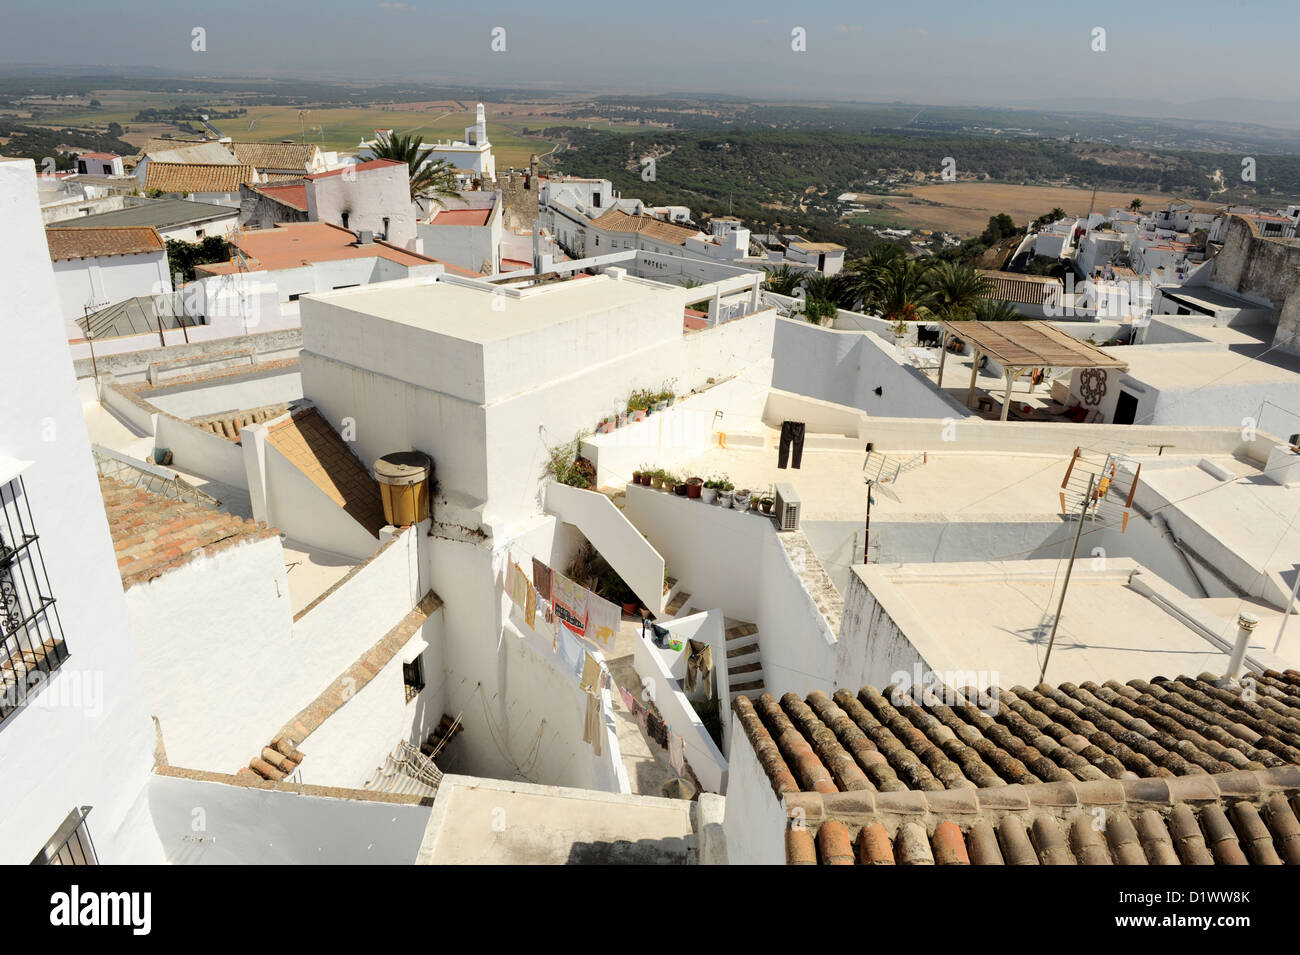 Vejer de la Frontera, one of the Pueblos Blancos or White Towns of Andalusia famous for their whitewashed walls, Southern Spain Stock Photo